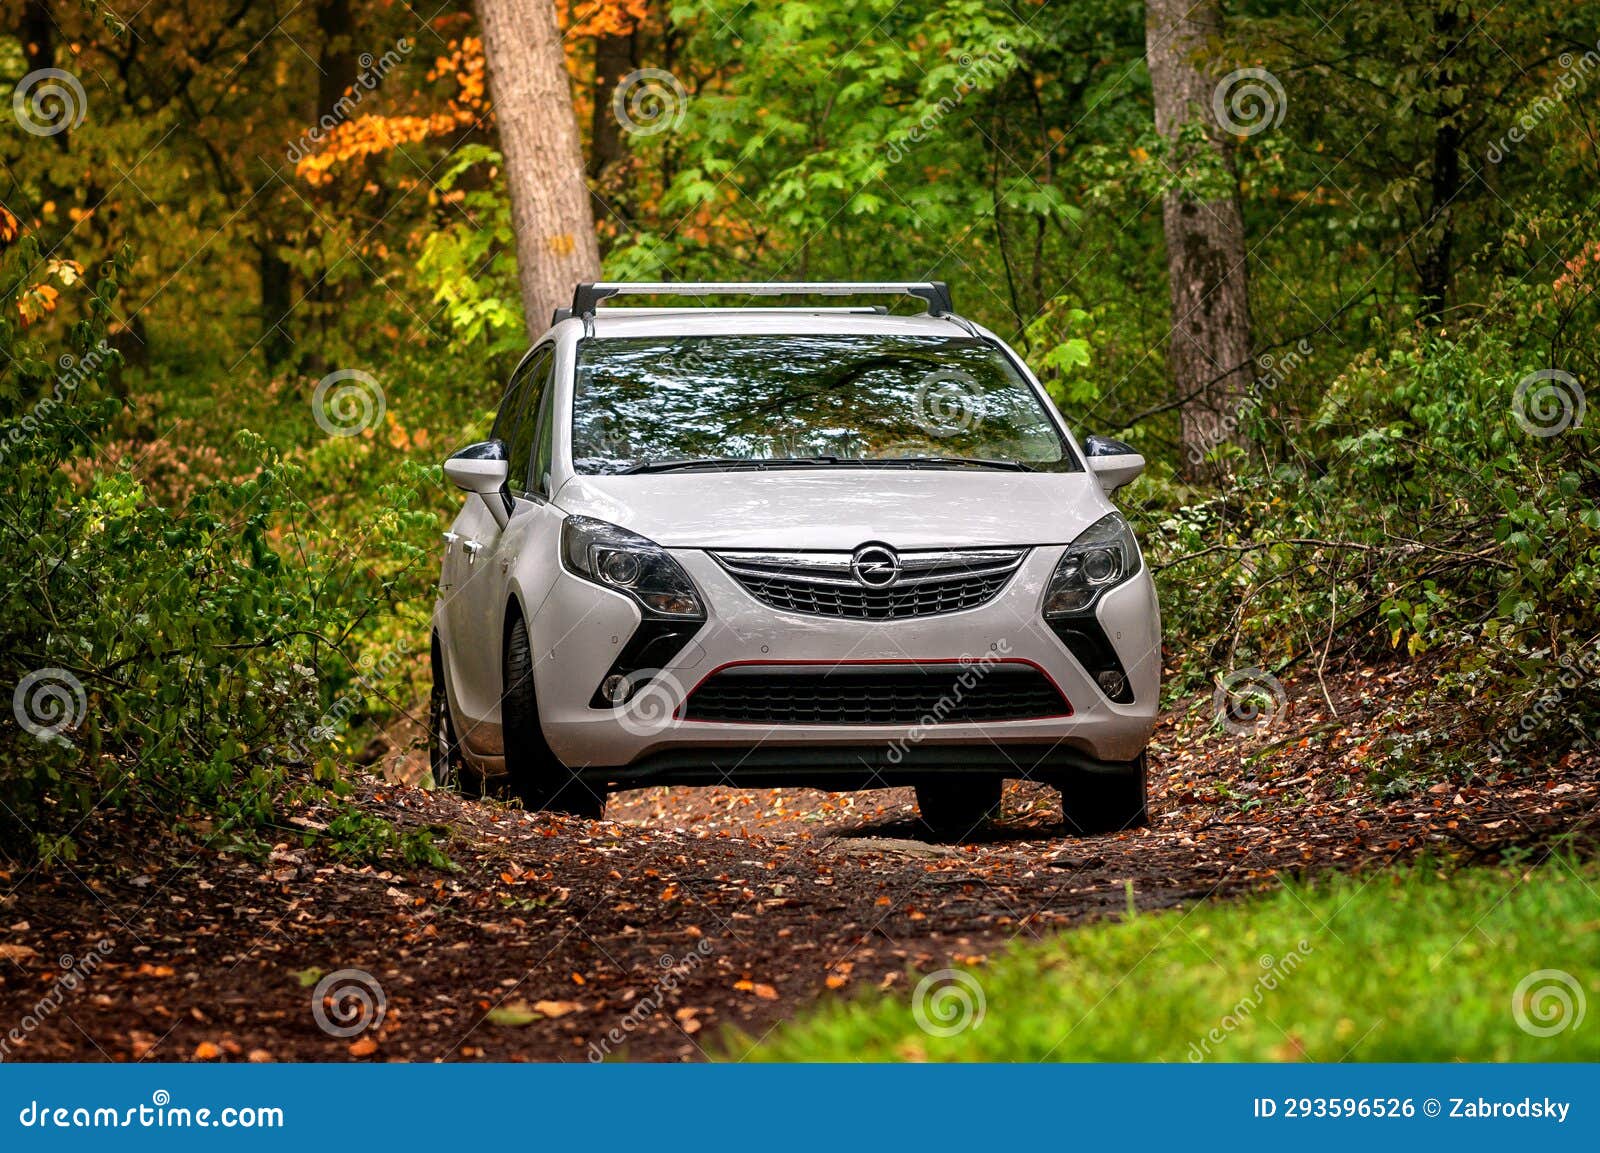 50+ Opel Zafira Stock Photos, Pictures & Royalty-Free Images - iStock